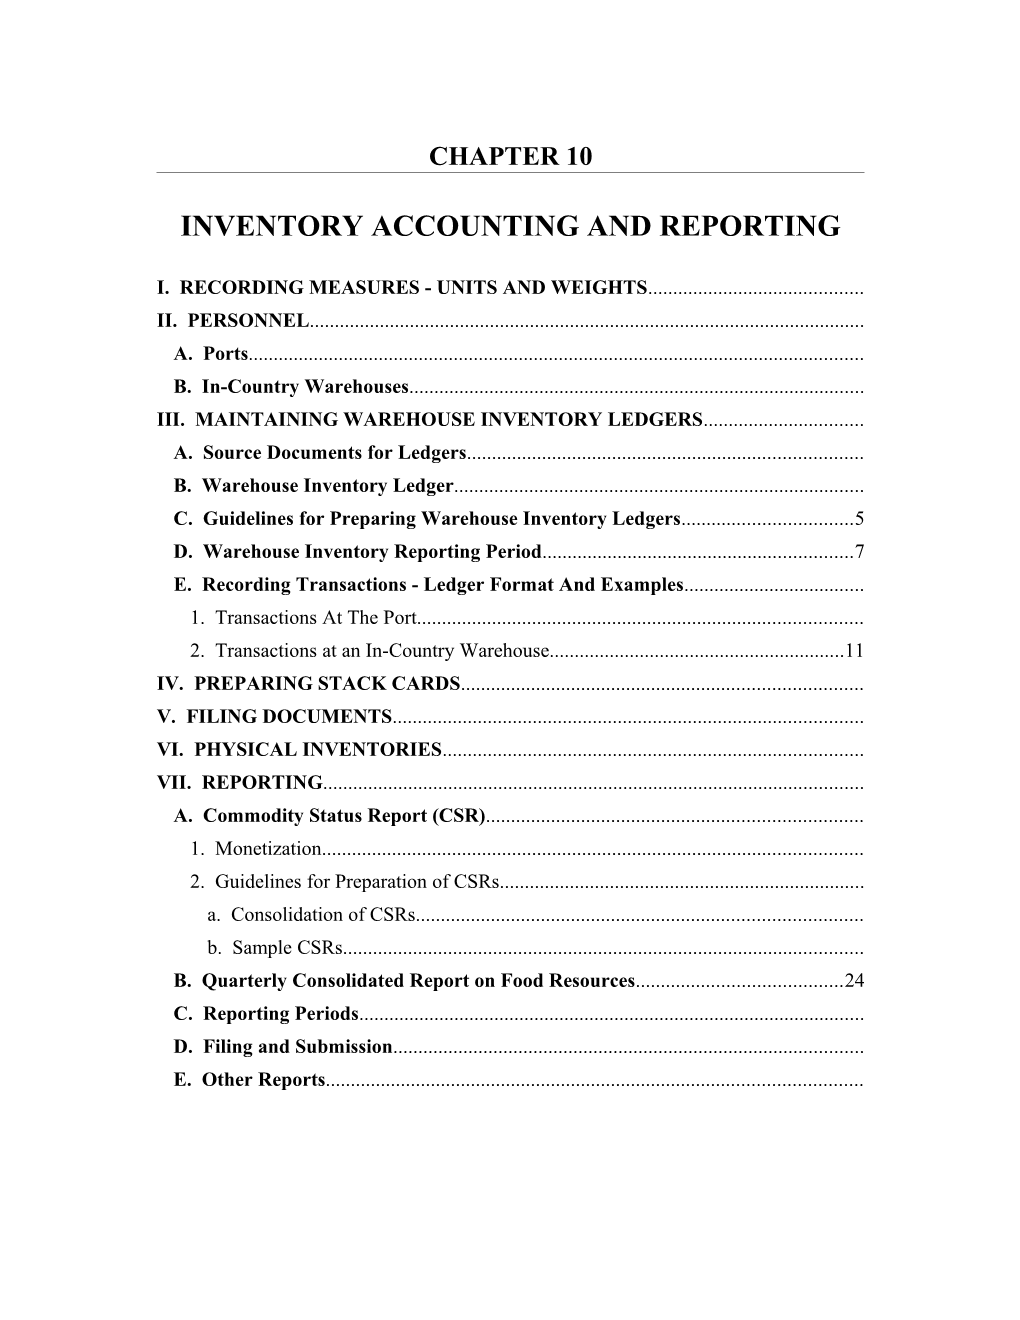 Inventory Accounting and Reportingpage 10-1